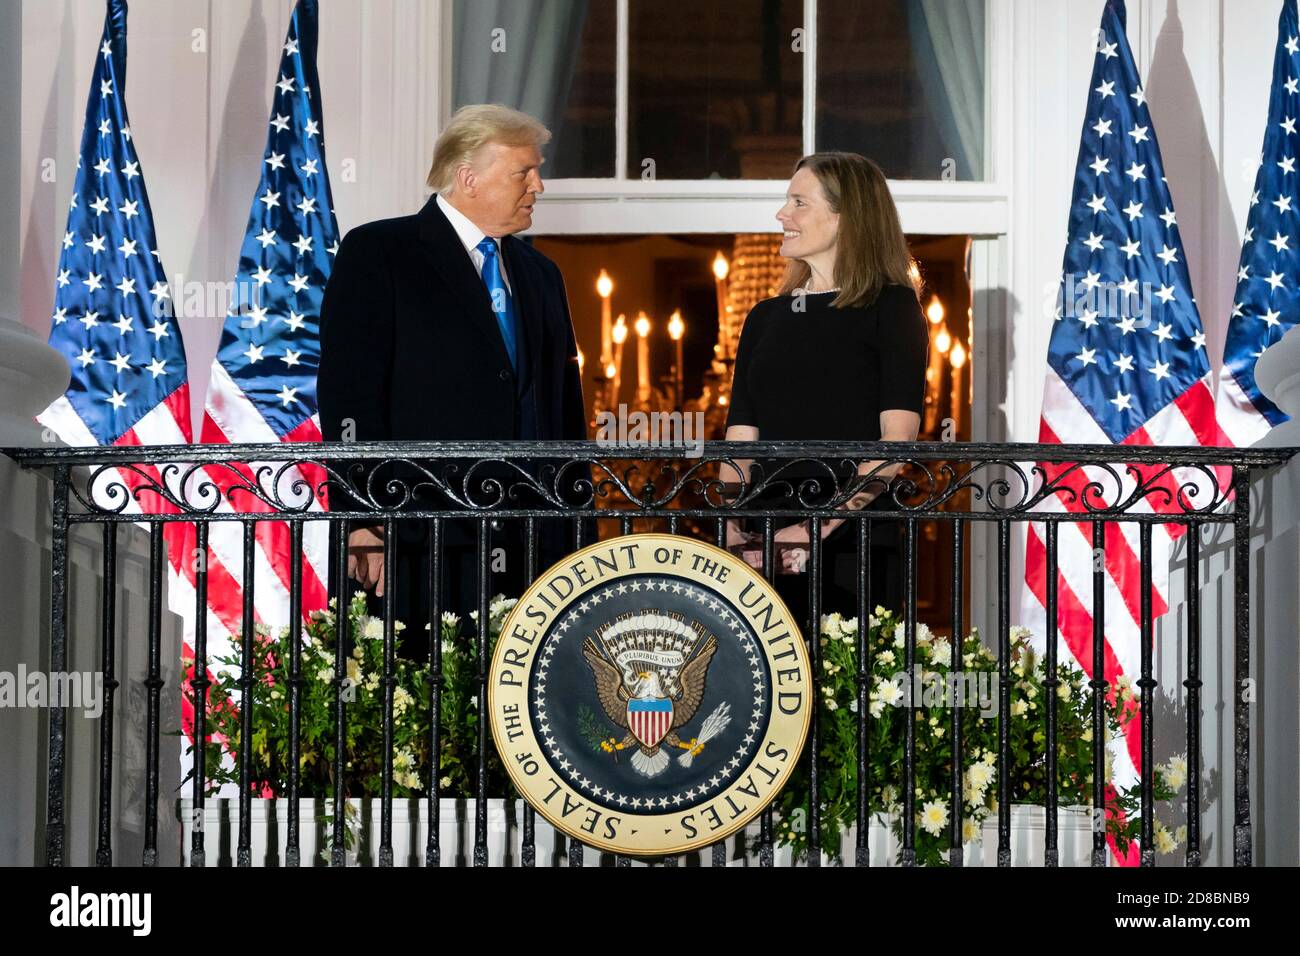 U.S President Donald Trump applauds U.S. Supreme Court Associate Justice Amy Coney Barrett from the Blue Room Balcony of the White House October 26, 2020 in Washington, DC. Stock Photo